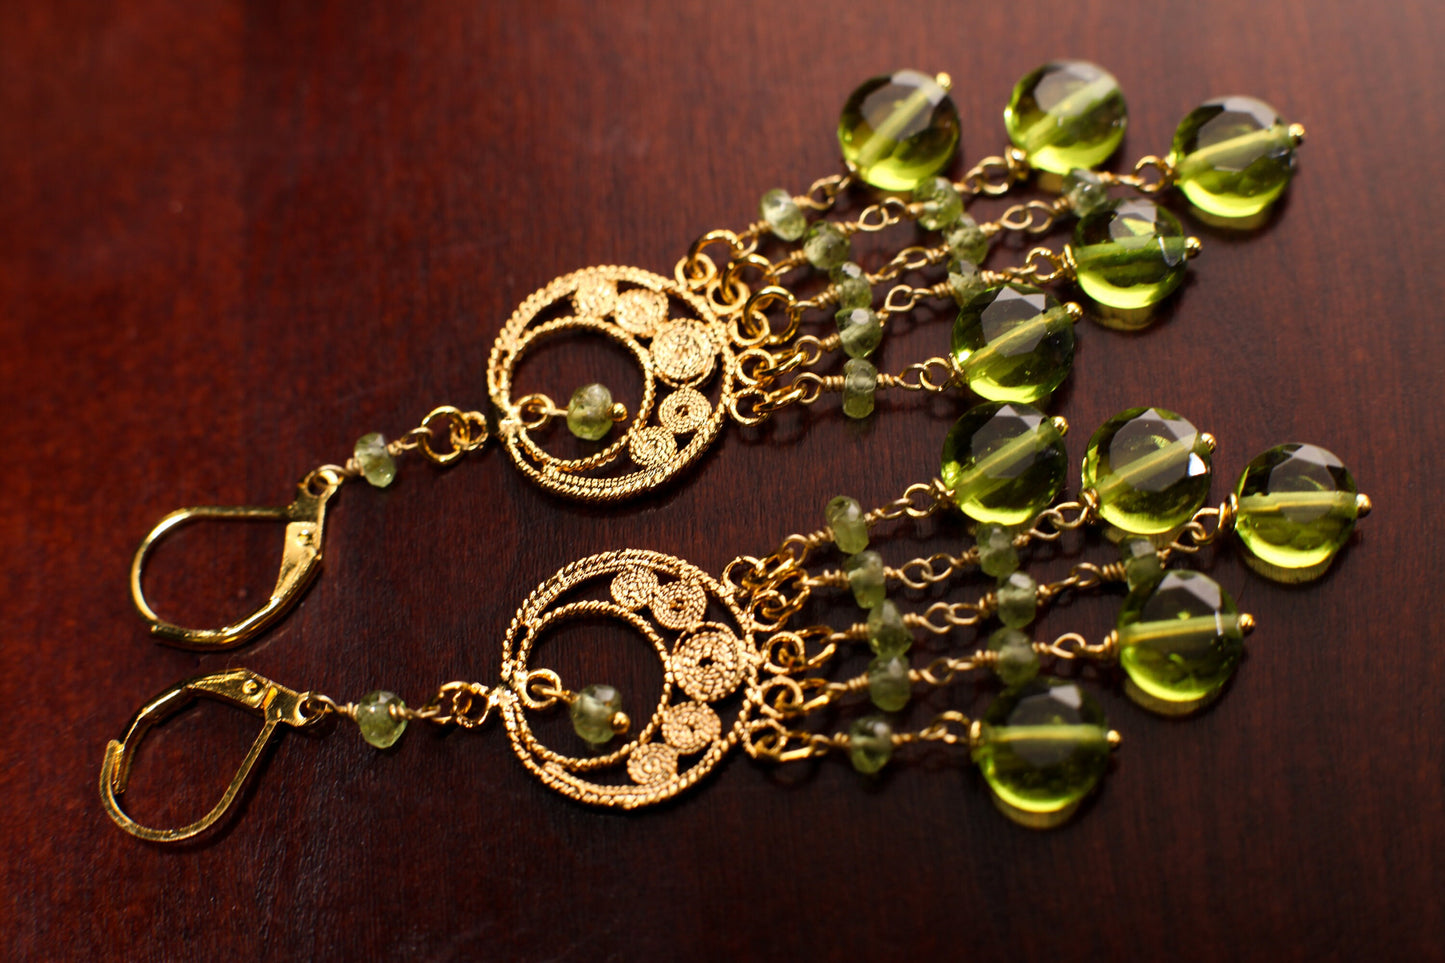 Peridot Wire Wrapped 3mm Rondelle Dangling with 8mm Peridot Quartz Coin, Gold Vermeil Chandelier earring.August Birthstone, Dreamcatcher